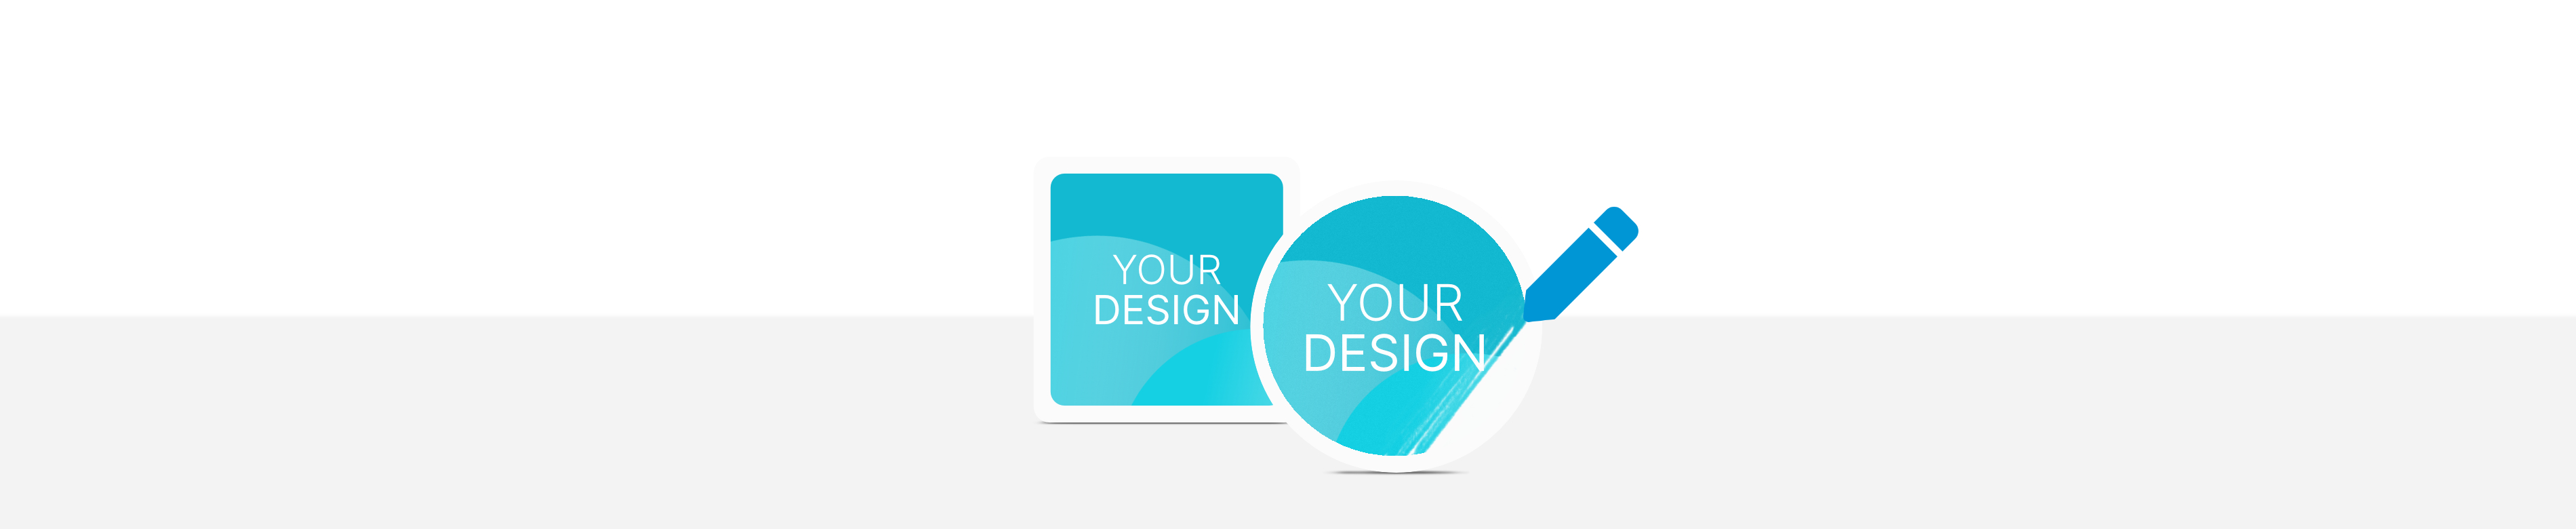 One round and one square sticker with the inscription "Your Design"